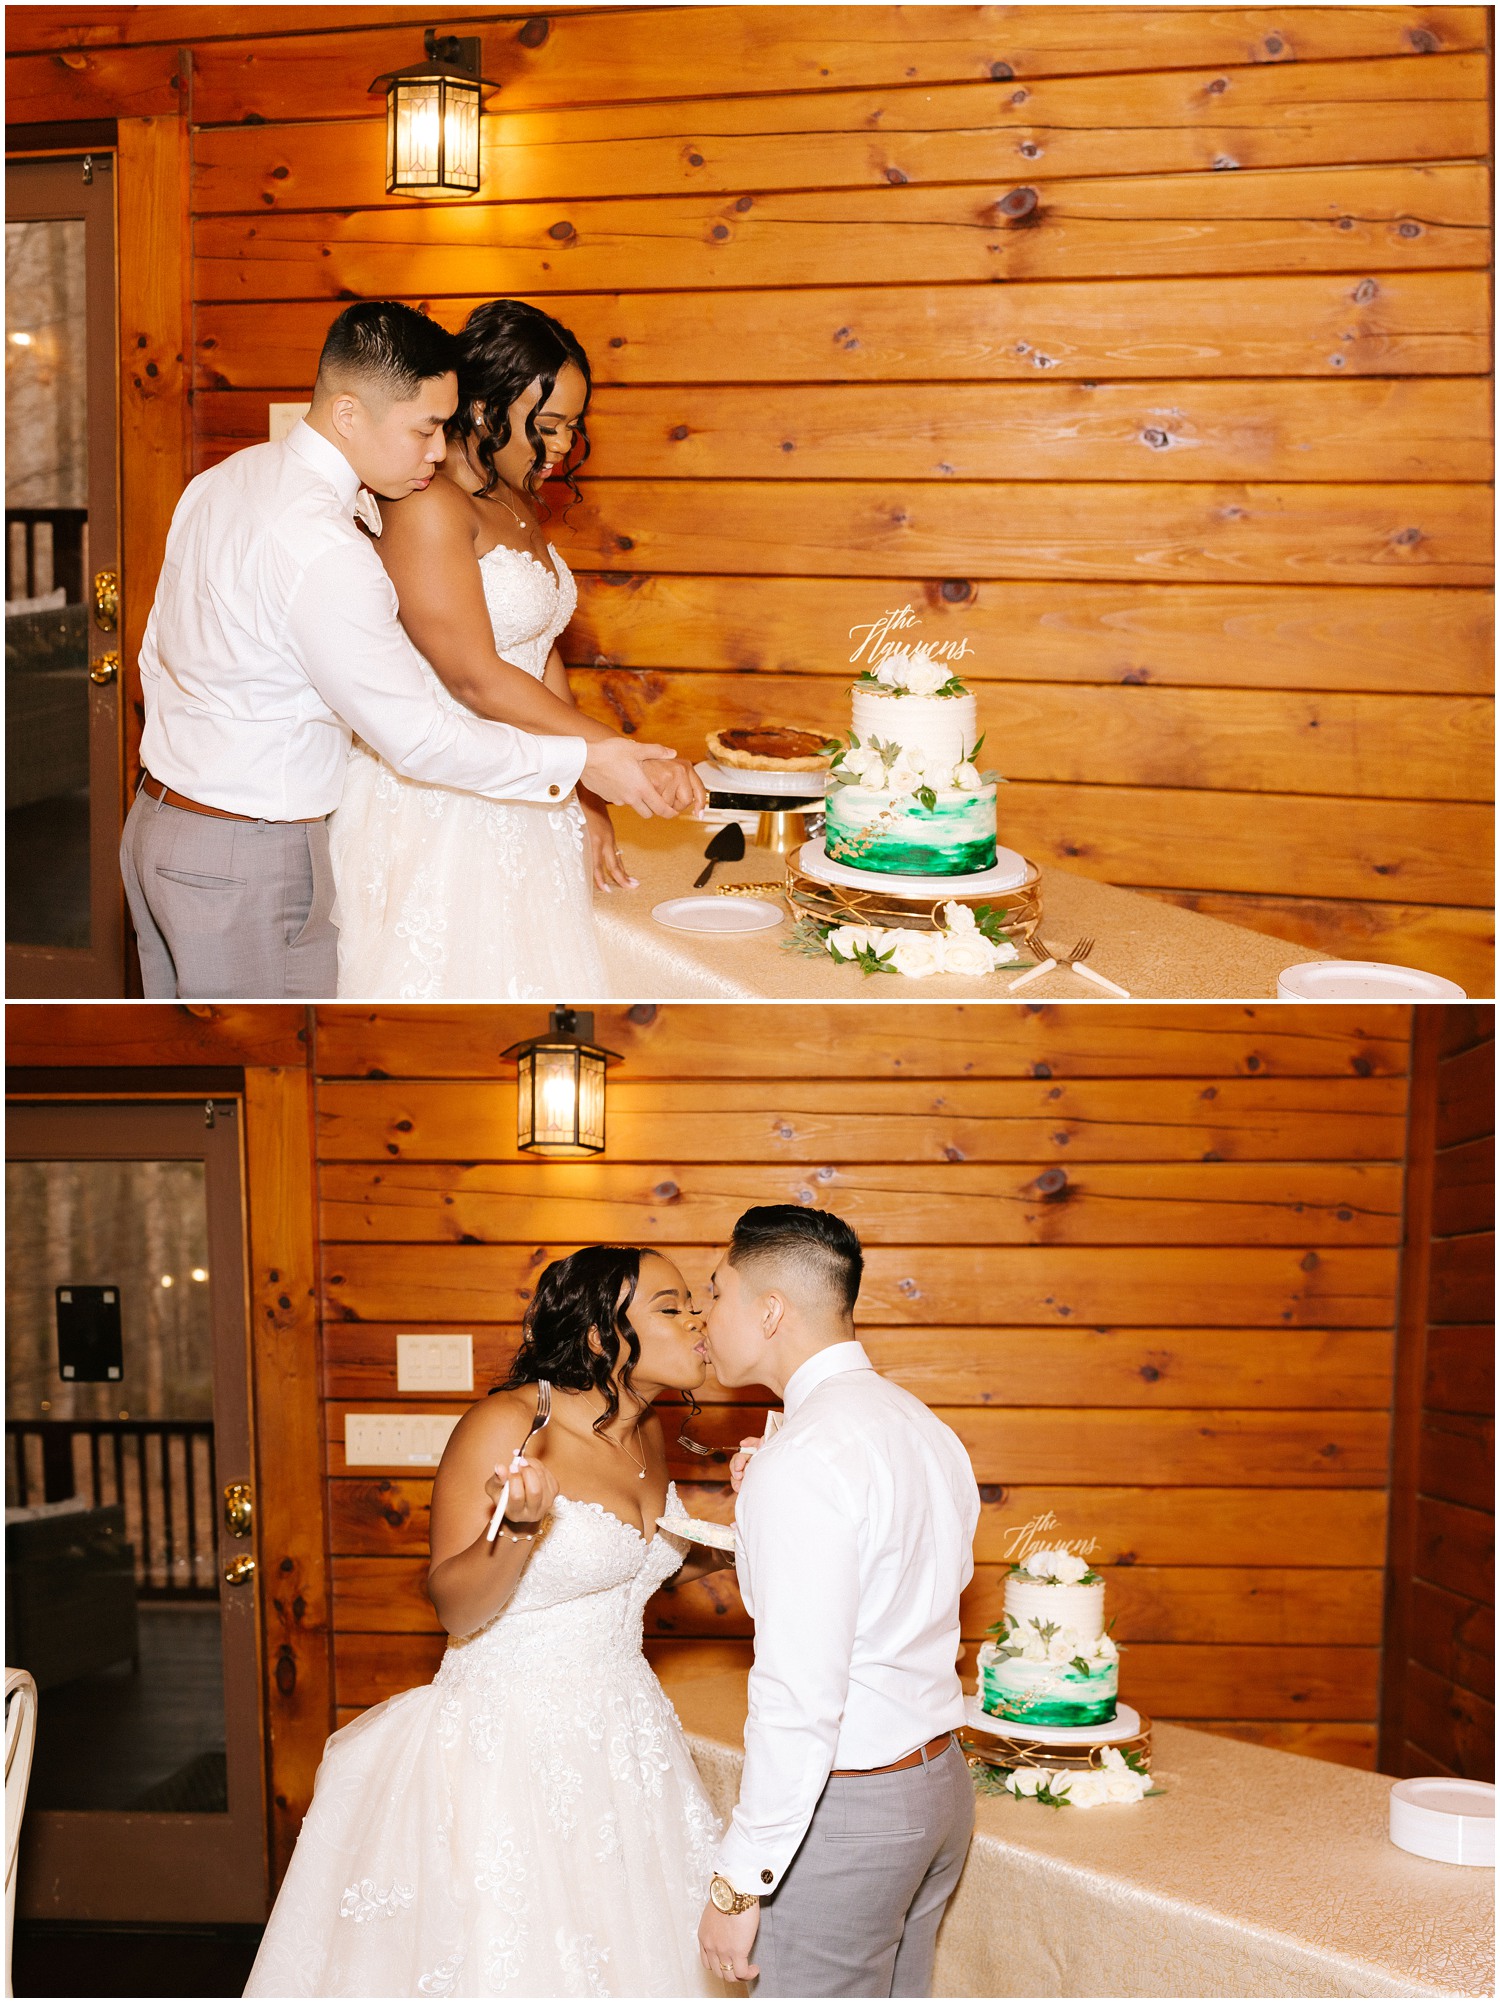 Couples cuts their wedding cake in Raleigh, NC.